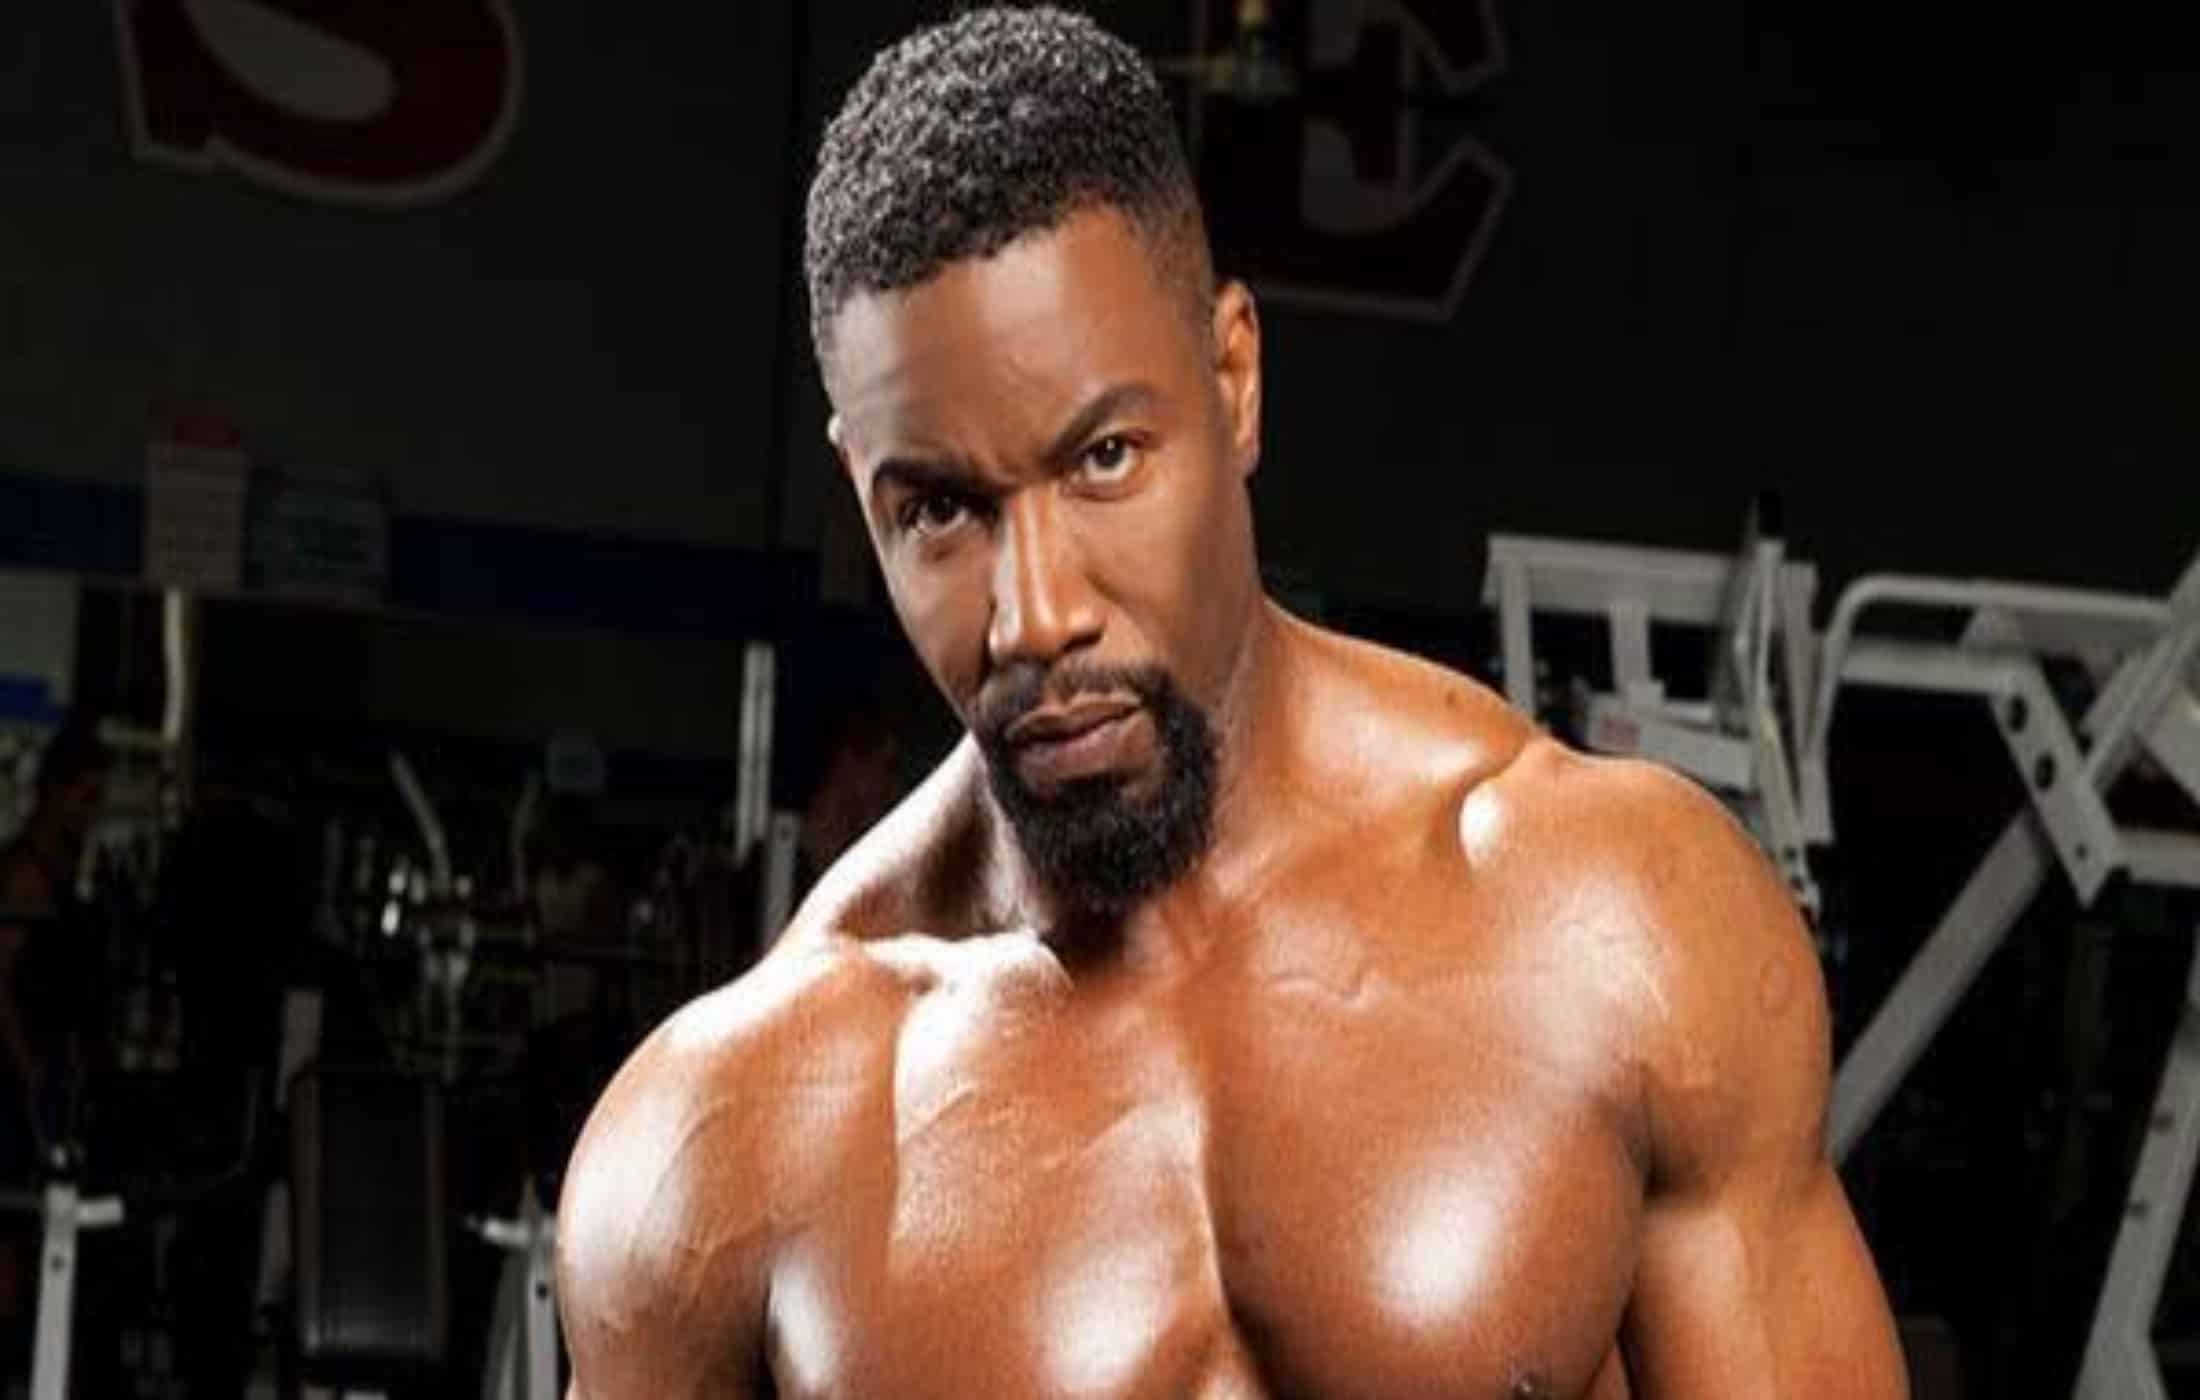 Michael Jai White age, net worth, wiki, family, biography and latest